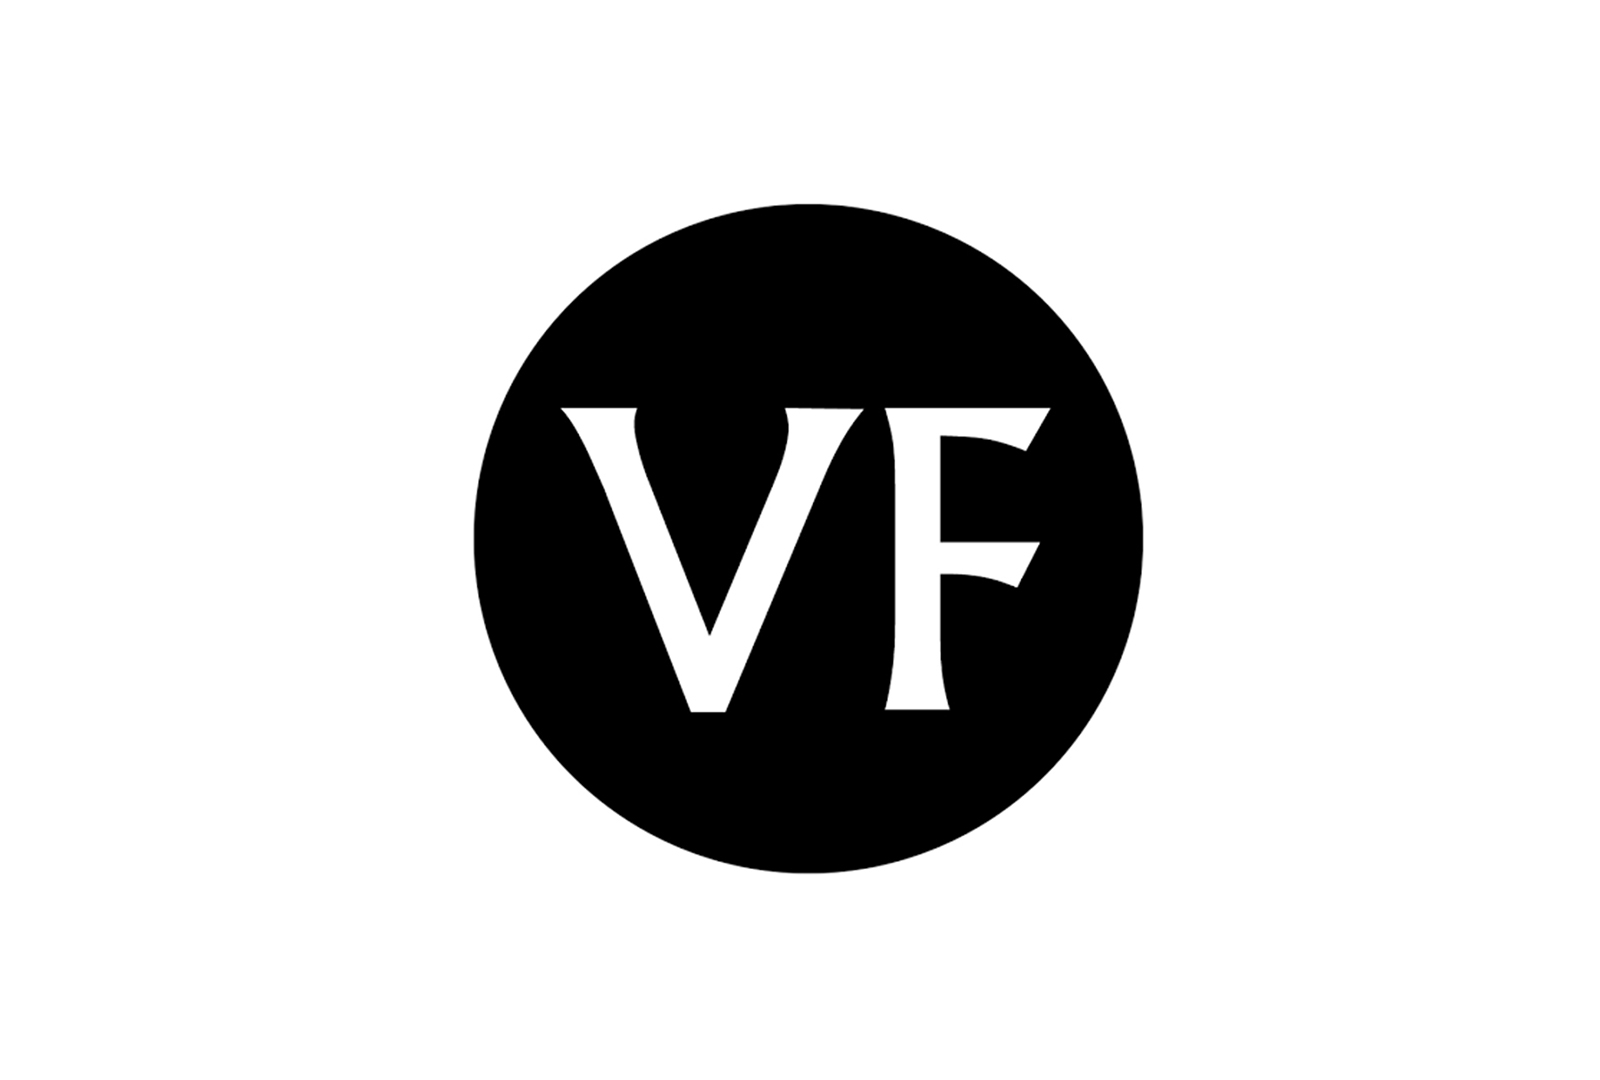 The Vinyl Factory is hiring a Staff Writer